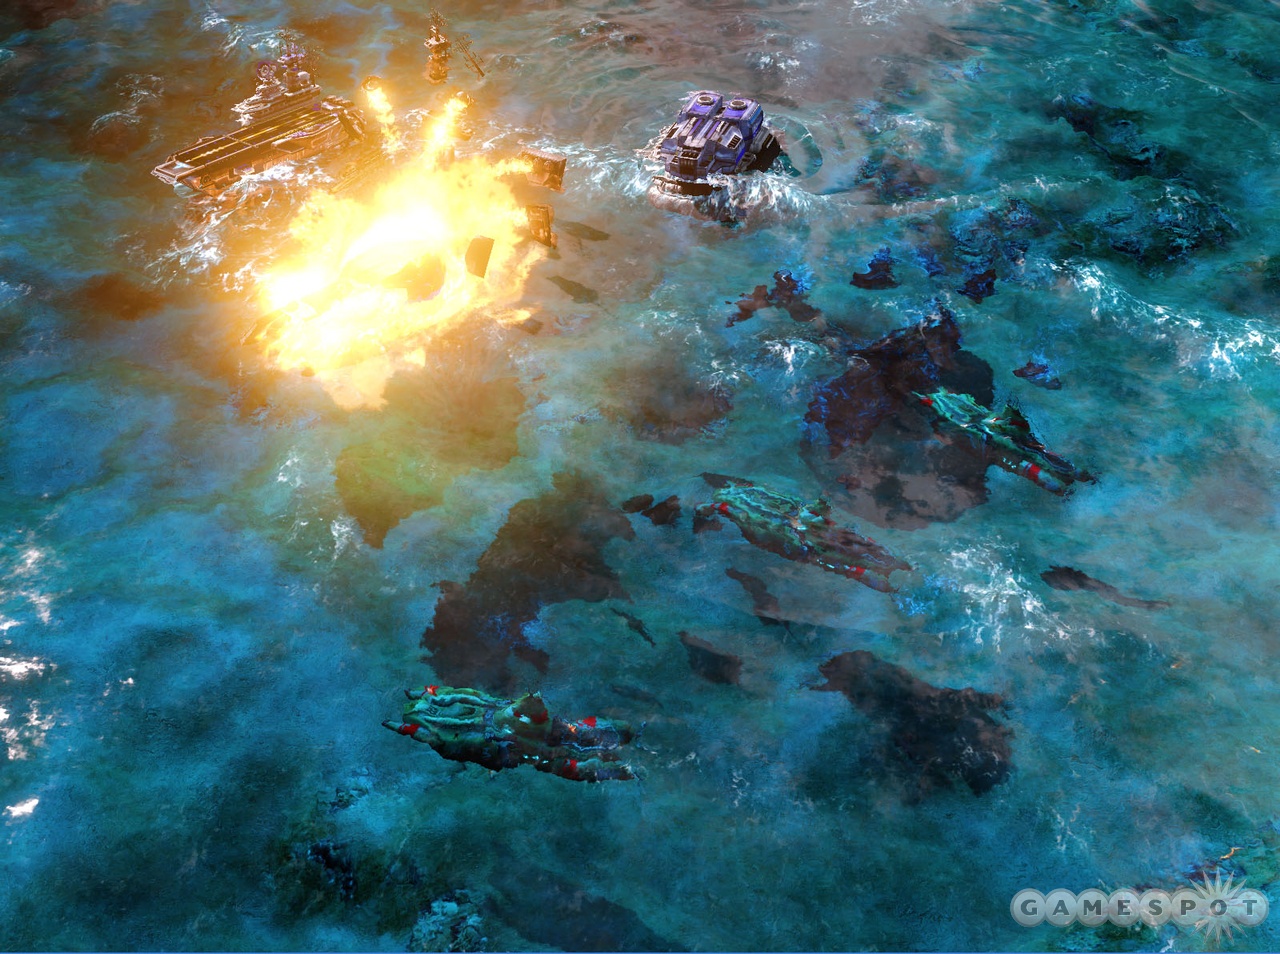 The game will have fast-paced gameplay, naval strategy, and bears that you can shoot out of cannons.